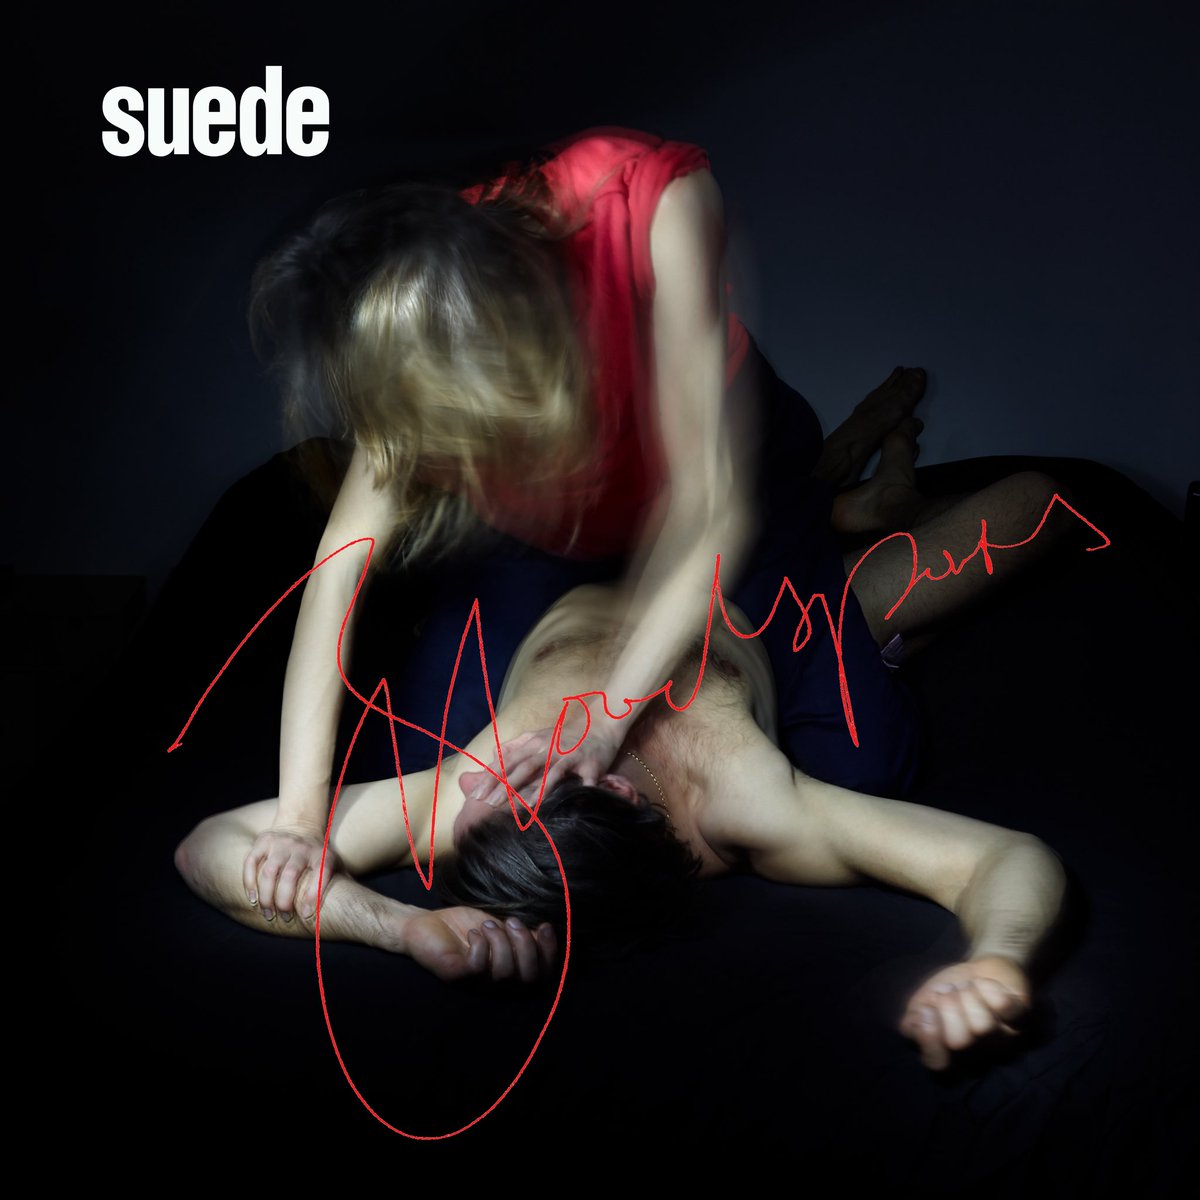 #OnThisDay in 2013, Suede marked their return with 'Bloodsports', their first studio album in over a decade. Stream the deluxe edition and check out brand new anniversary editions of the album here: suedehq.lnk.to/Bloodsports - SuedeHQ